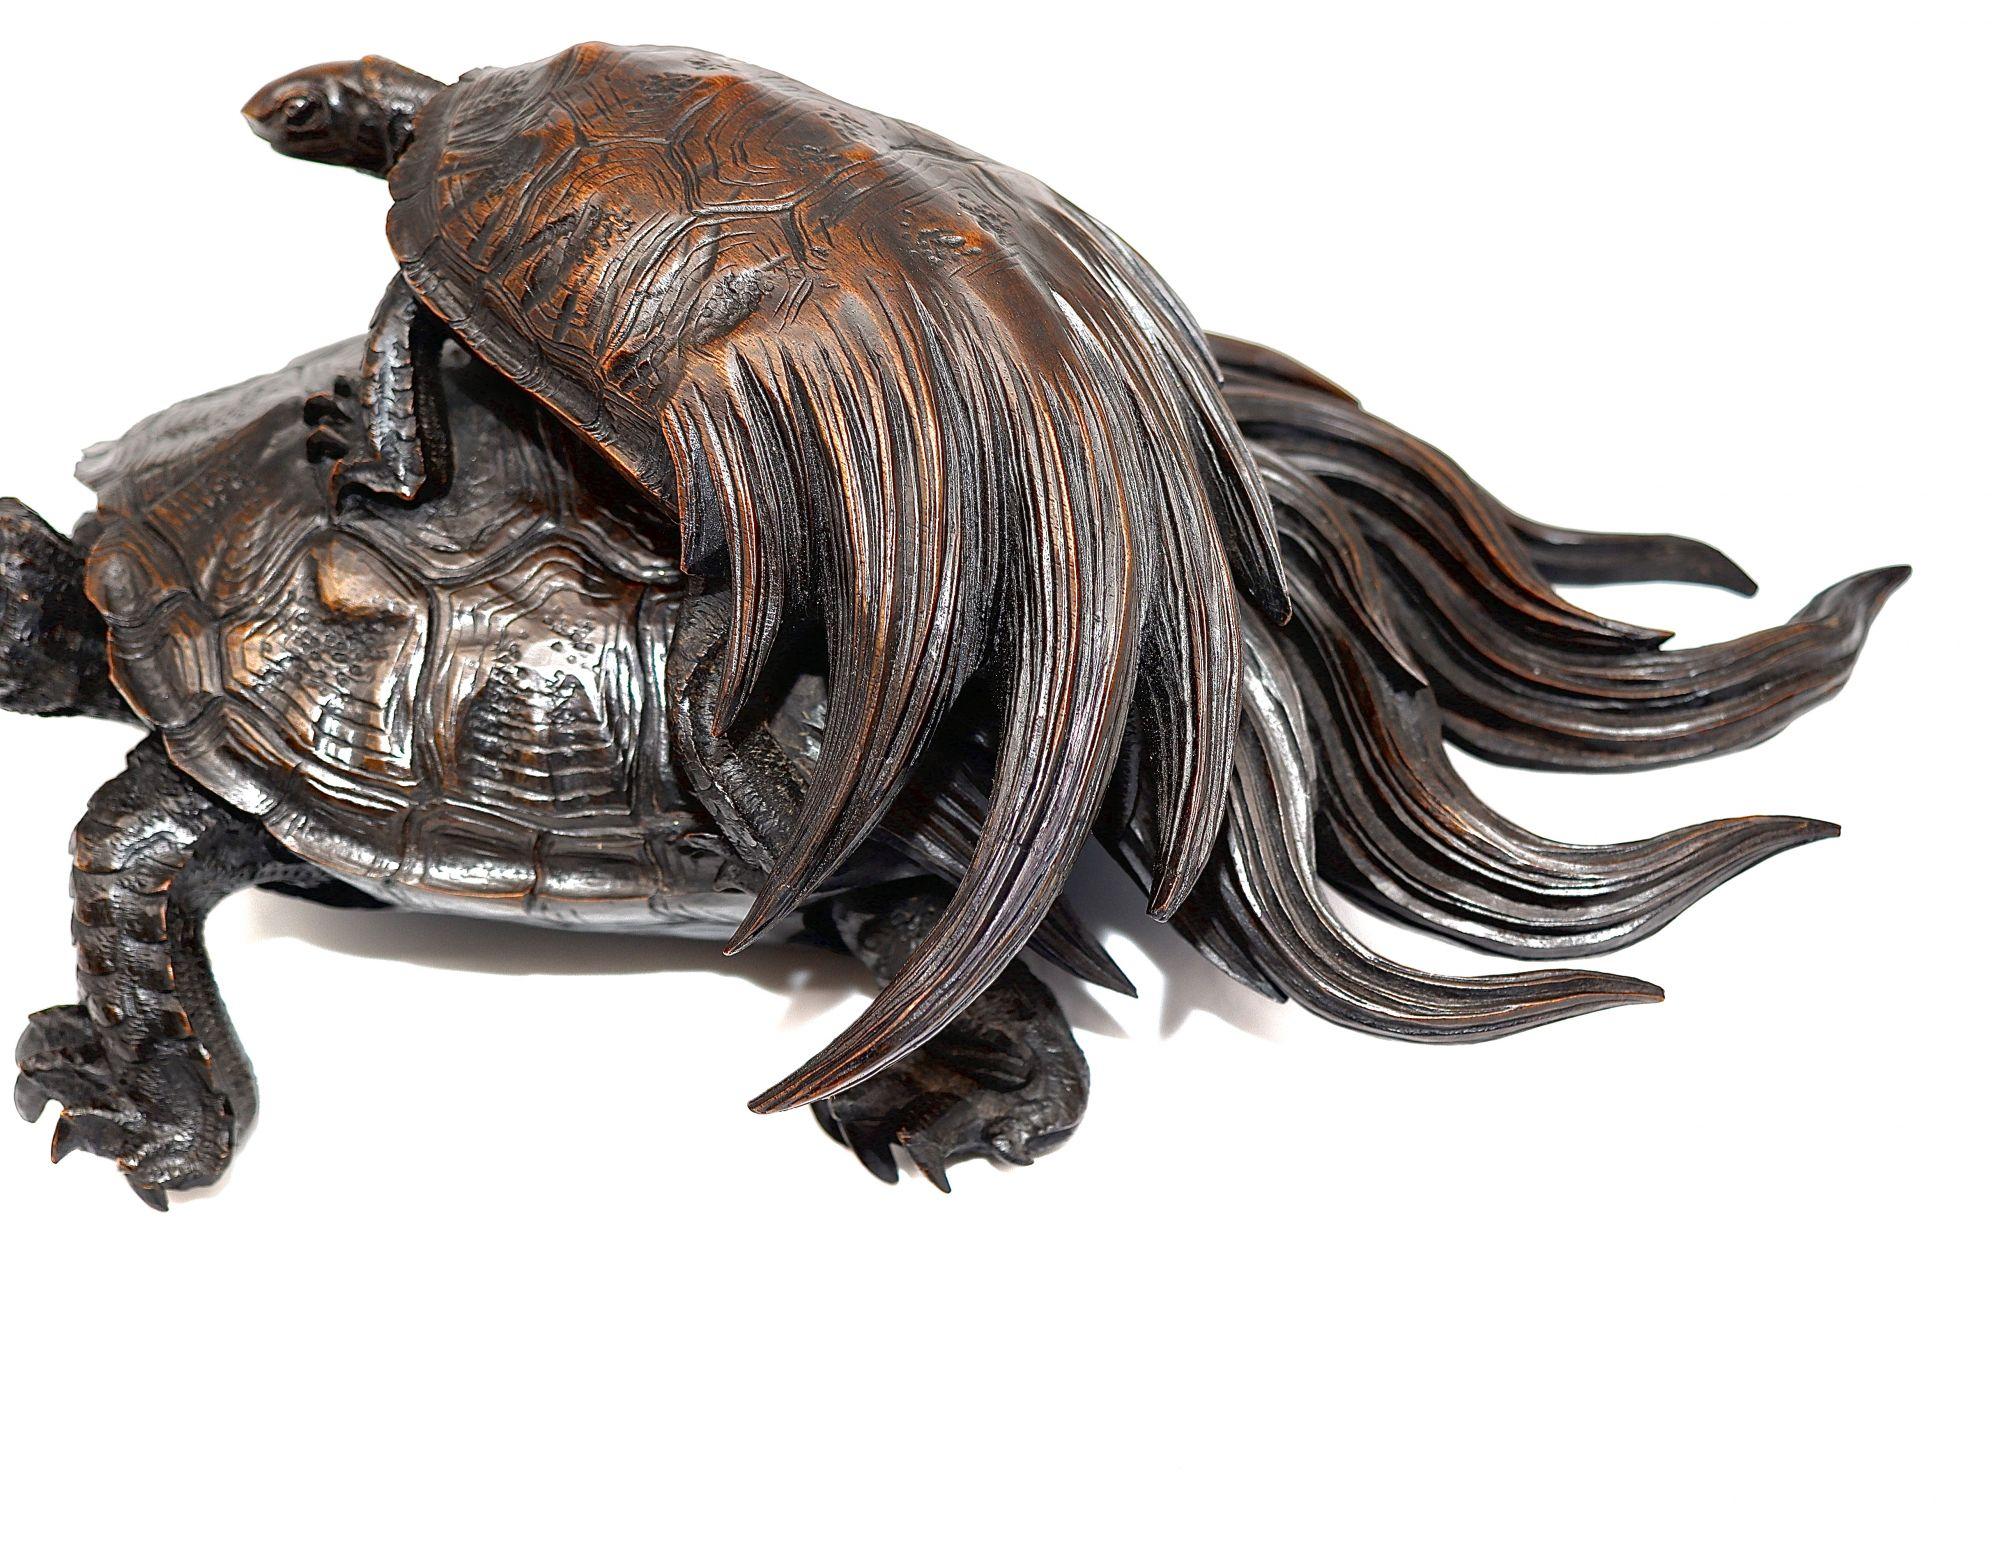 A sculpture of 2 Minogame turtles with their distinctive fan-like tails. The smaller turtle is standing in the she’ll of the larger one. This is an excellent Japanese hardwood carving dating from the late 18th century. The artist has managed to